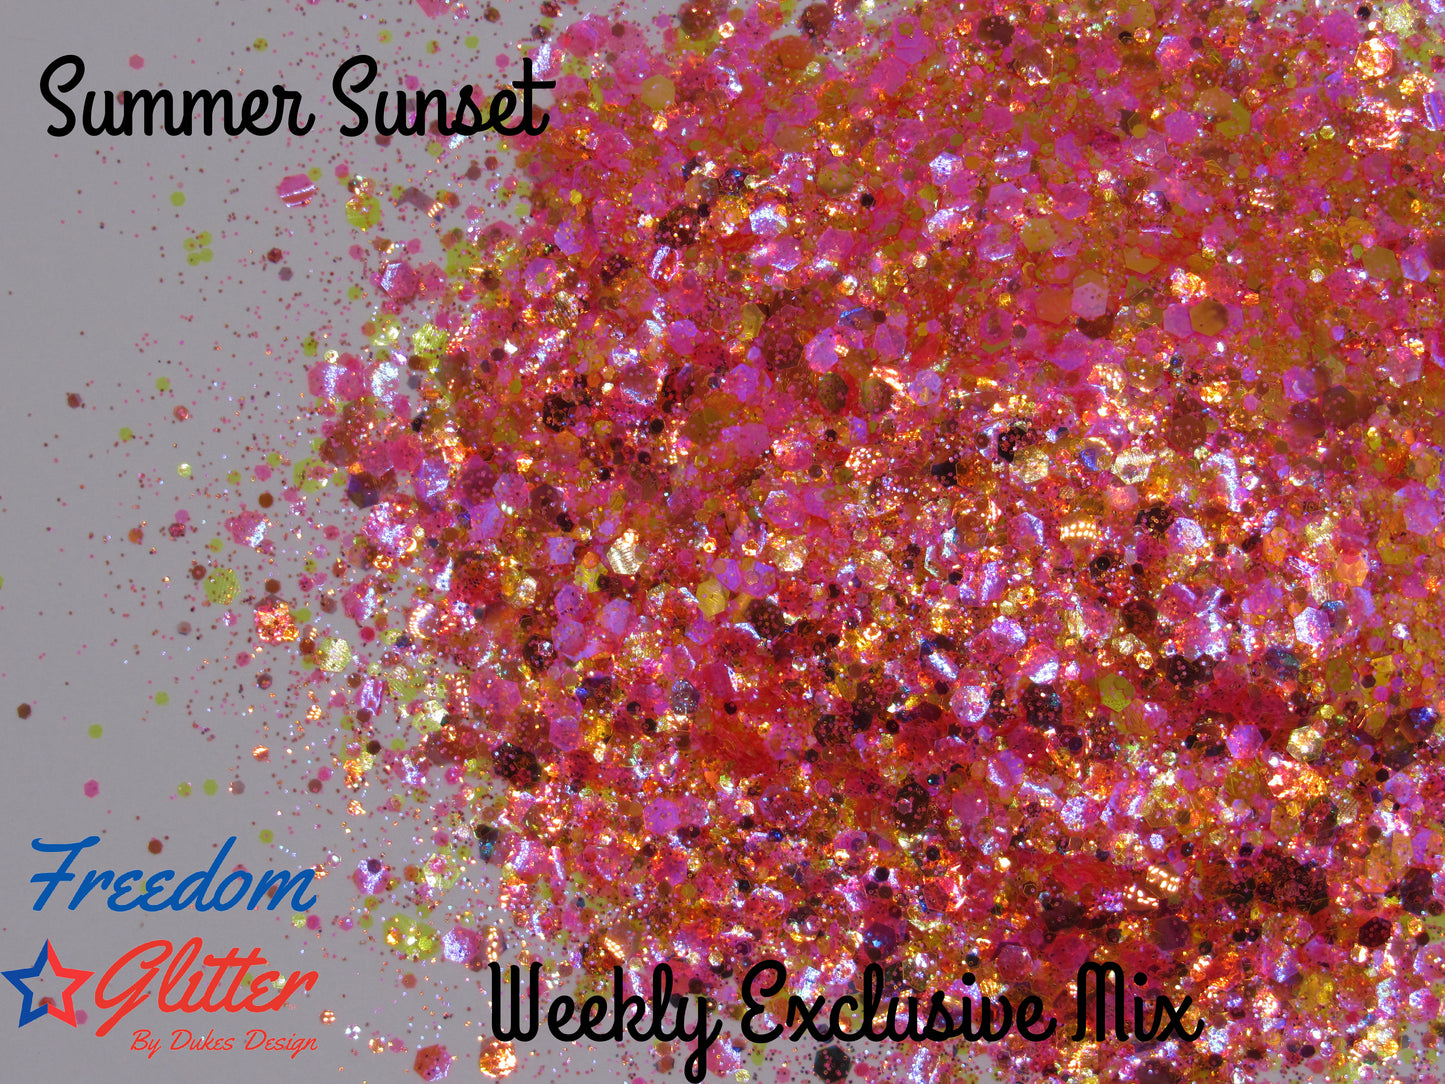 Summer Sunsets (Exclusive Mix)